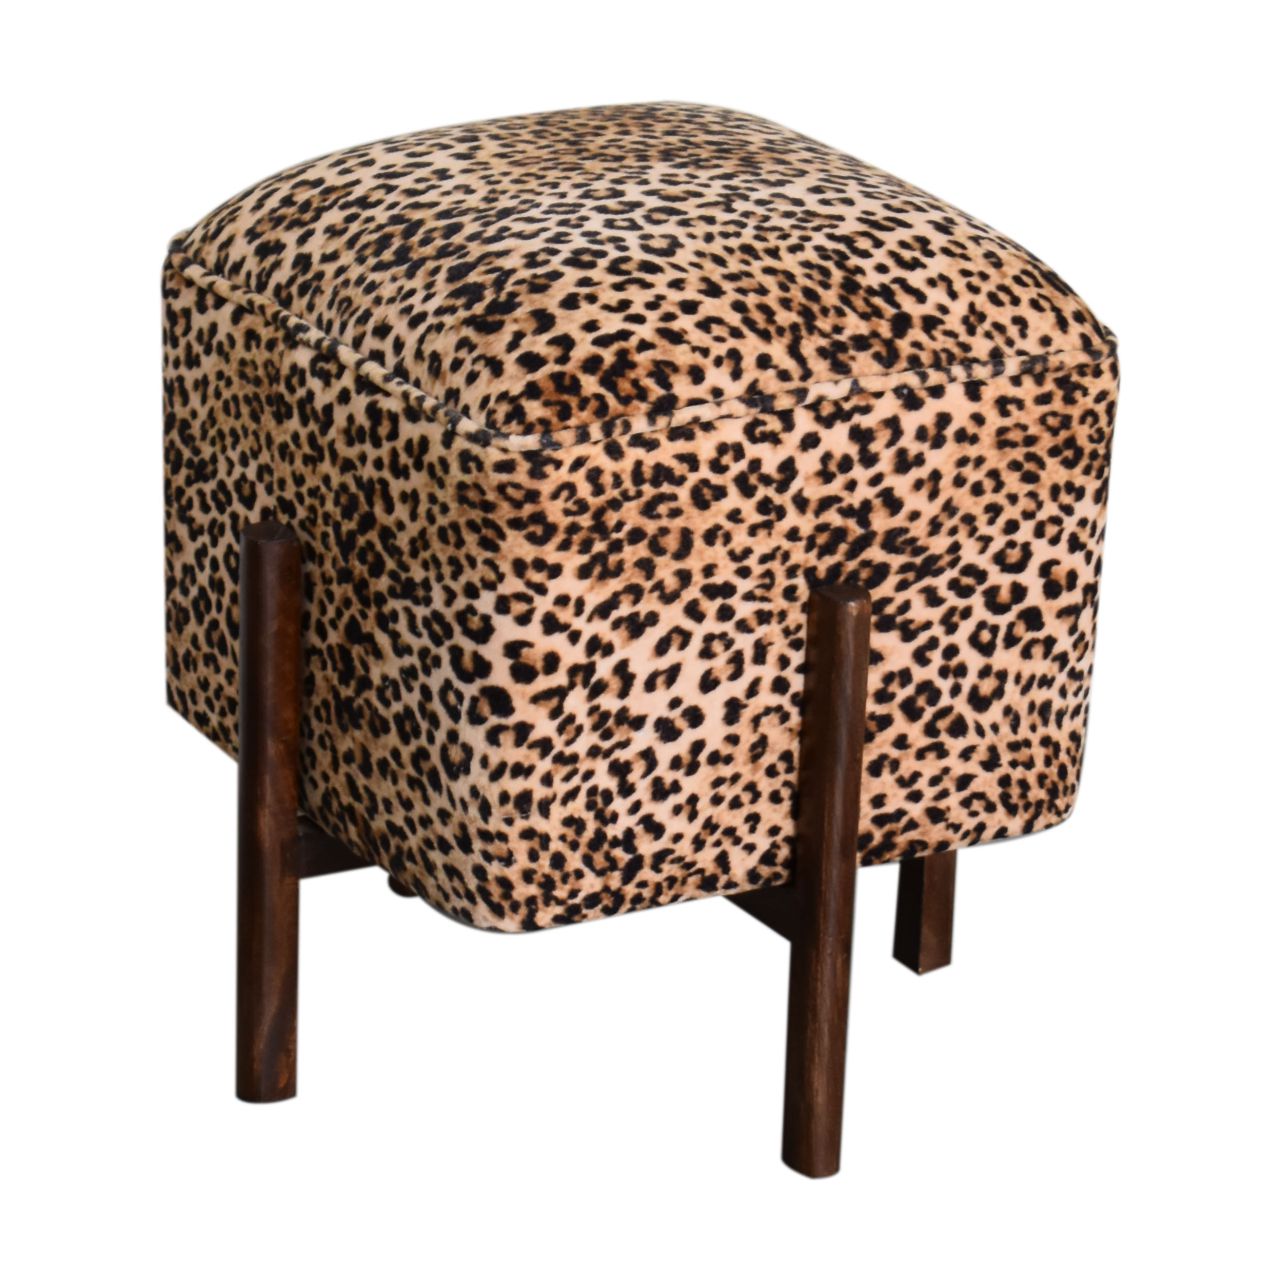 Leopard Print Footstool with Solid Wood Legs